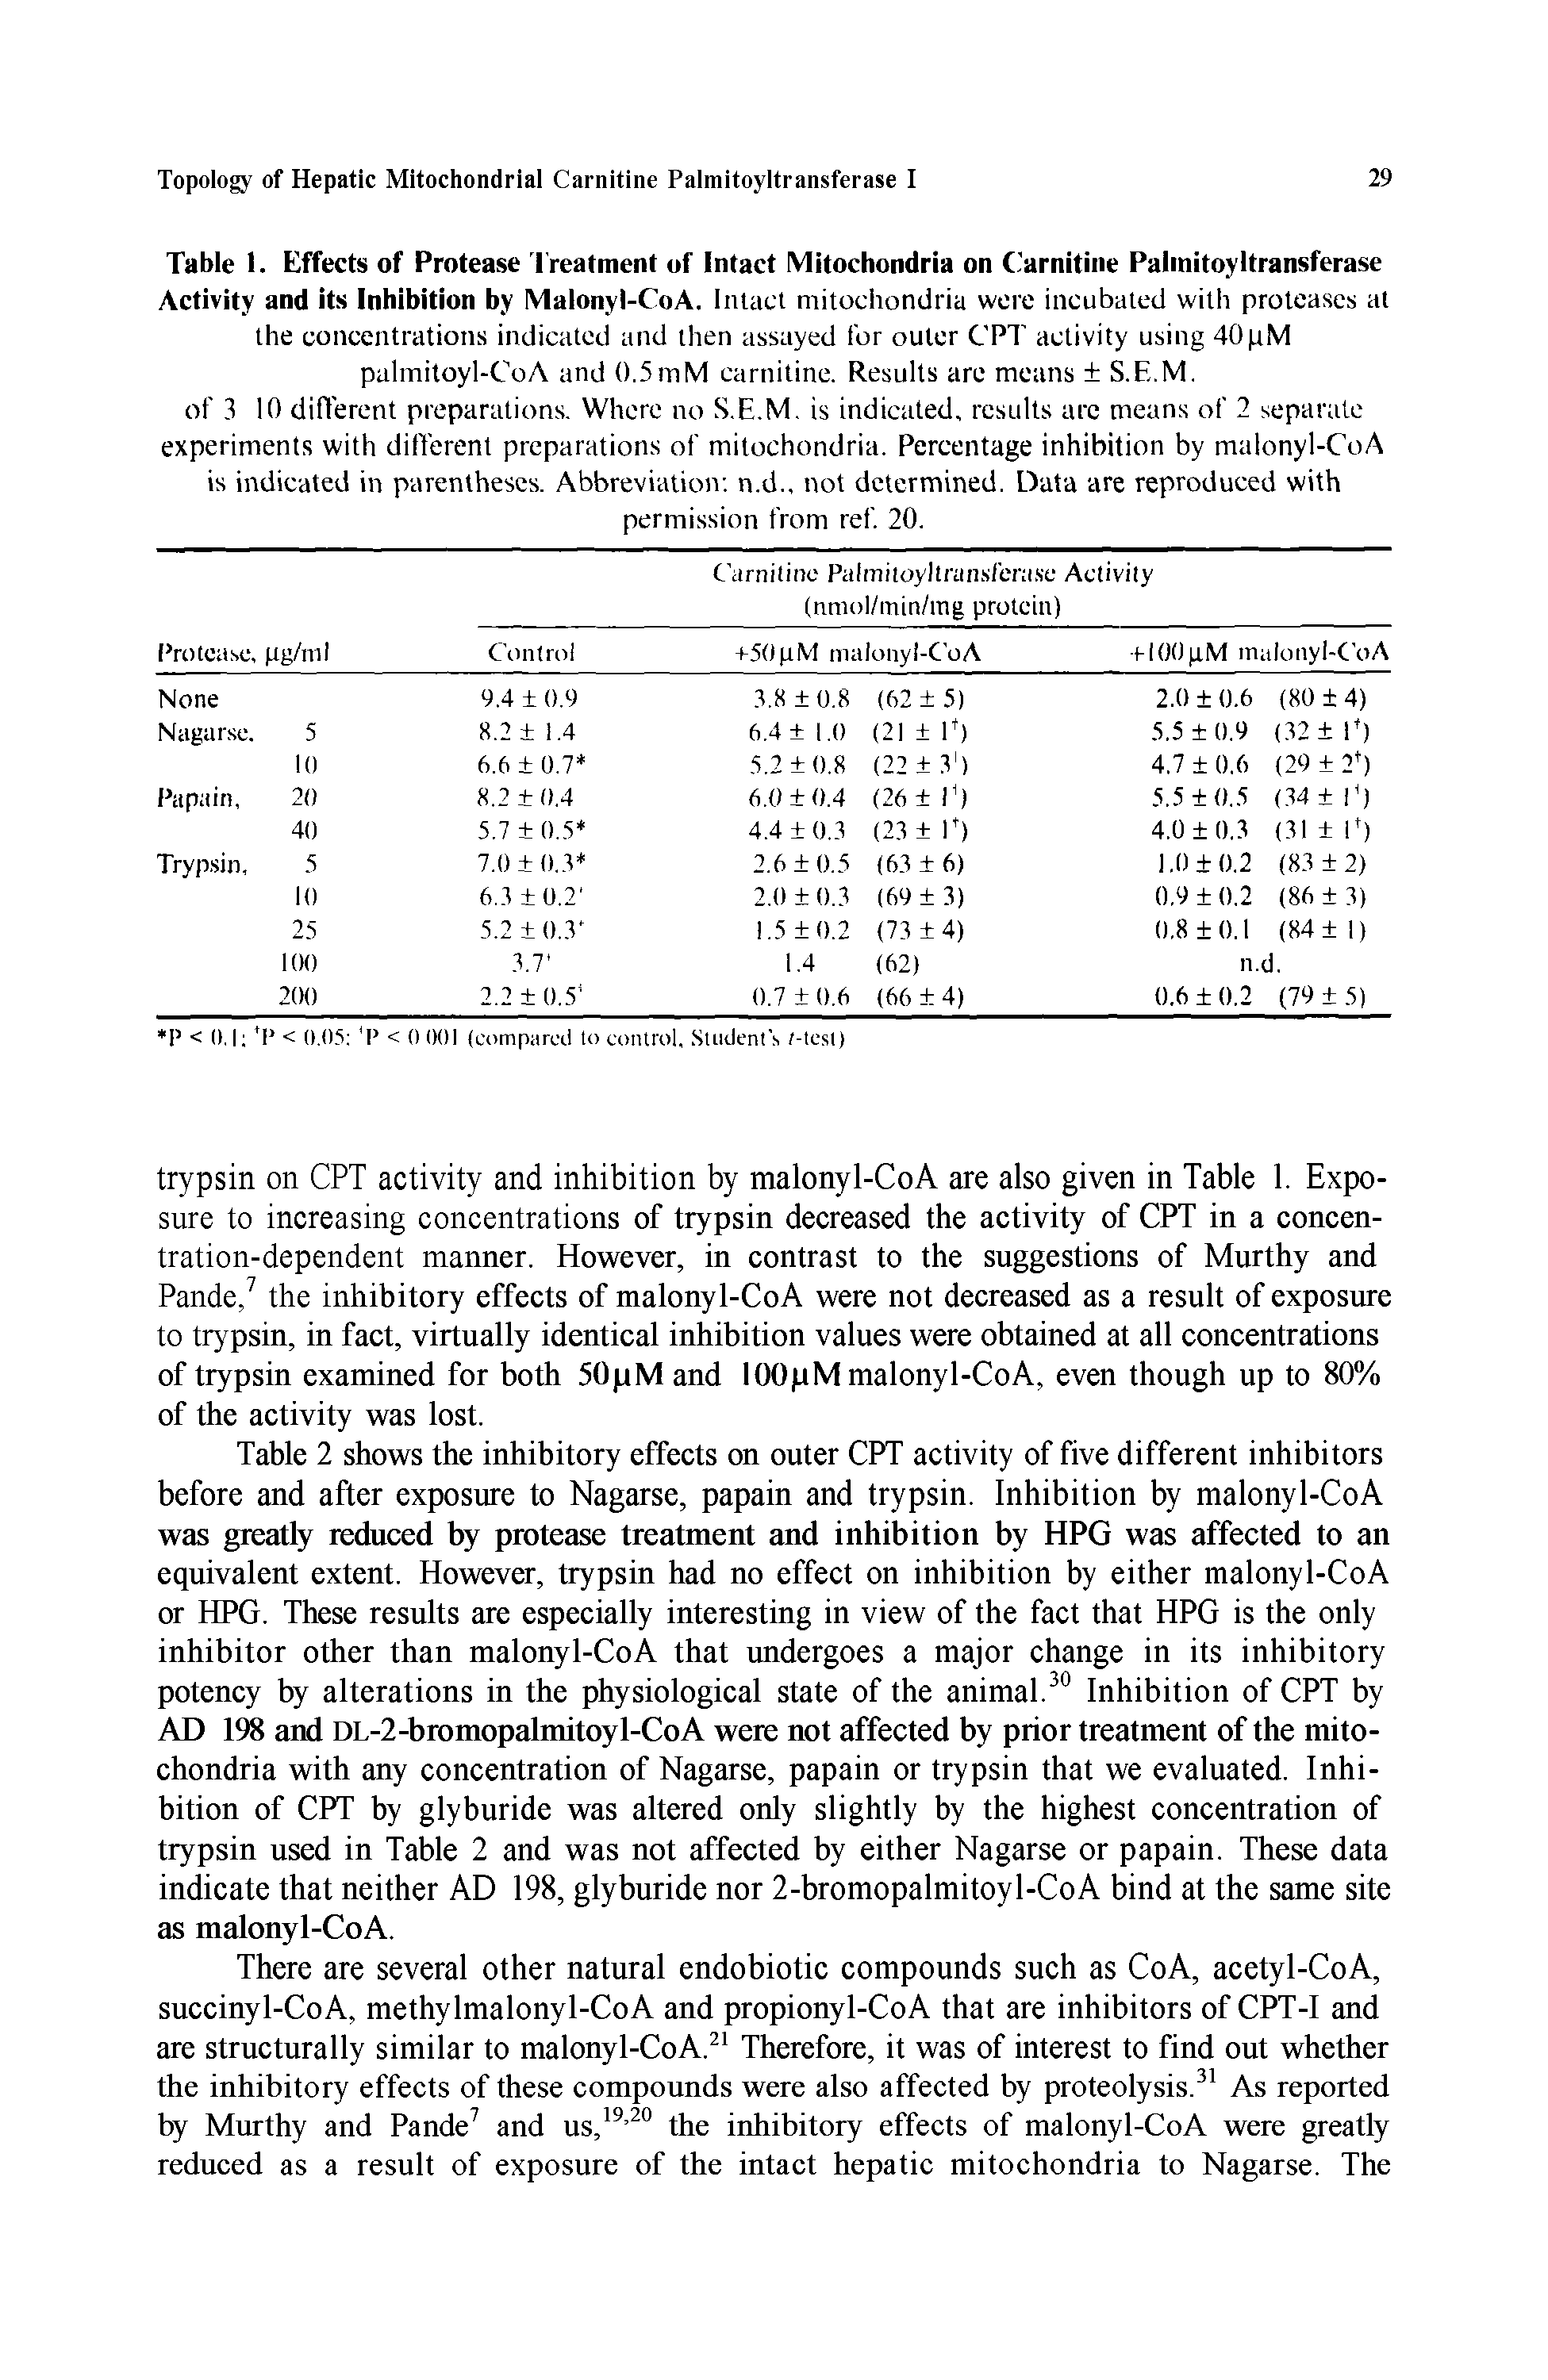 Table I. Effects of Protease T reatment of Intact Mitochondria on C arnitine Palmitoyltransferase Activity and its Inhibition by Malonyl-CoA. Intact mitochondria were incubated willi proteases at the concentrations indicated and then assayed for outer CPT activity using 40pM palmitoyl-CoA and ().5mM carnitine. Results are means S.E.M. of 3 10 difl erent preparations. Where no S.E.M. is indicated, results arc means of 2 separate experiments with different preparations of mitochondria. Percentage inhibition by malonyl-CoA is indicated in parentheses. Abbreviation n.d., not determined. Data are reproduced with...